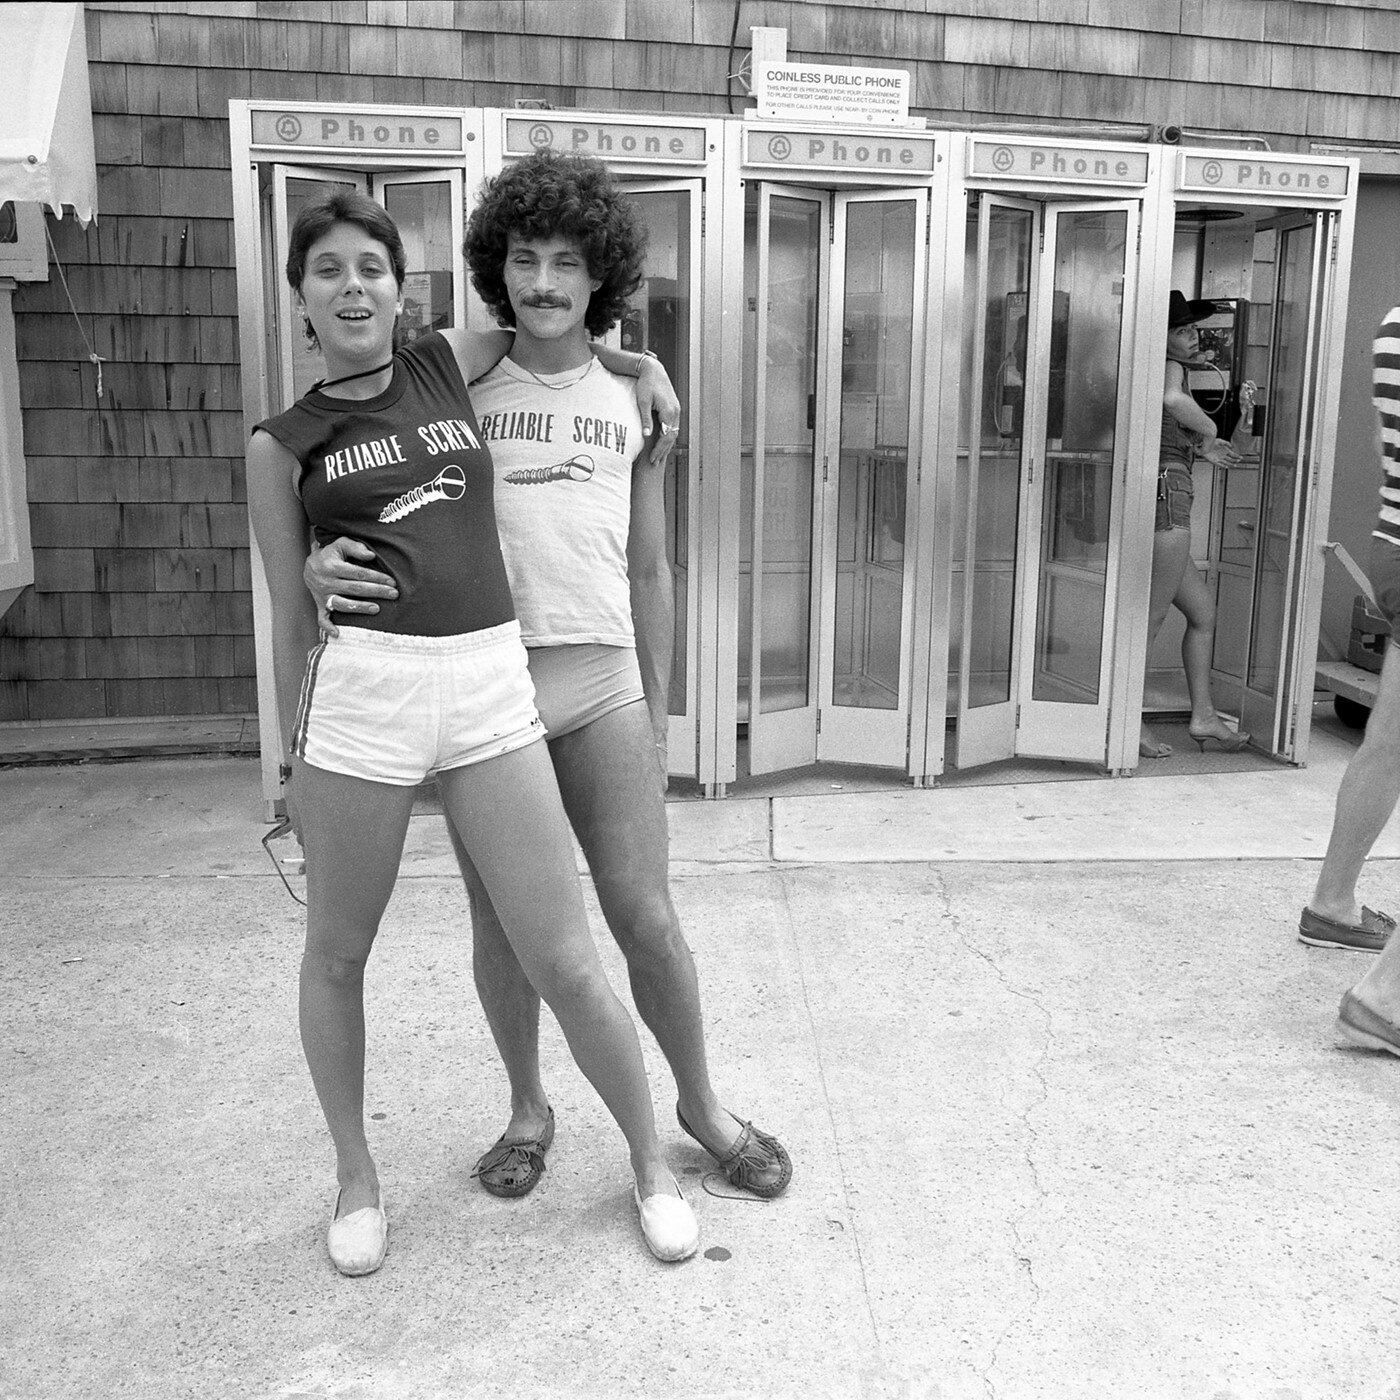 Reliable screws and coinless public phones, Cherry Grove, Fire Island, NY, 1977.